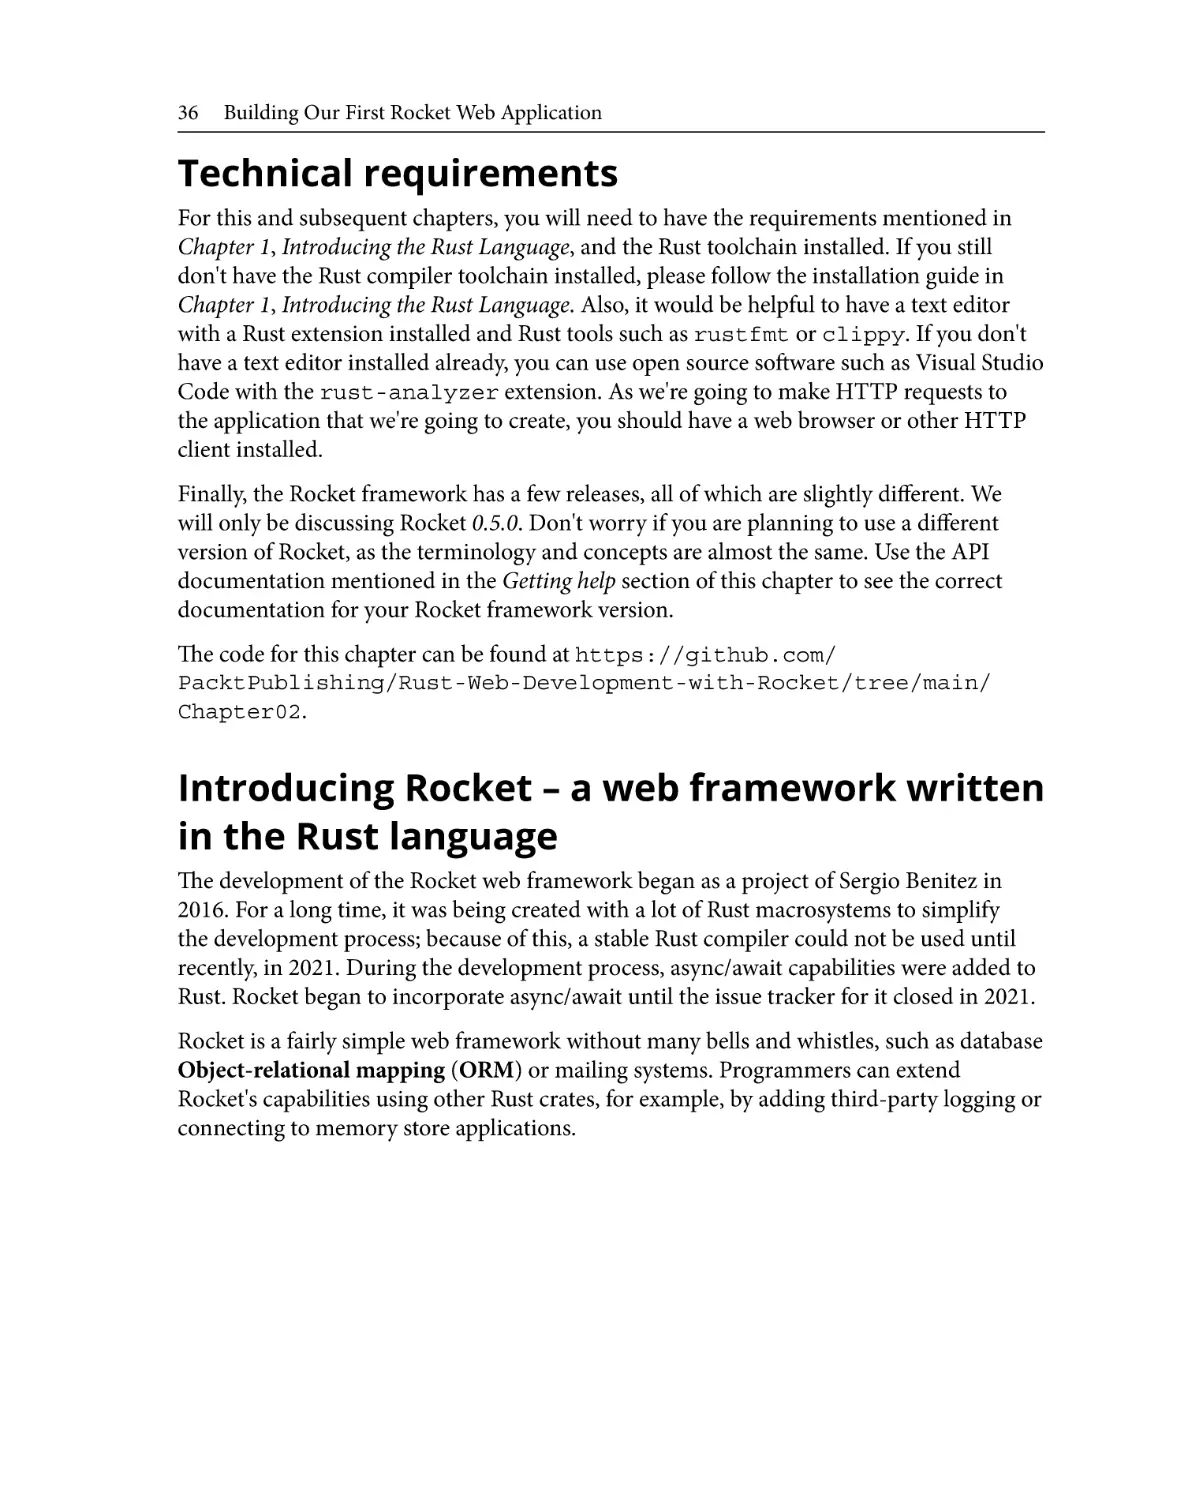 Technical requirements
Introducing Rocket – a web framework written in the Rust language